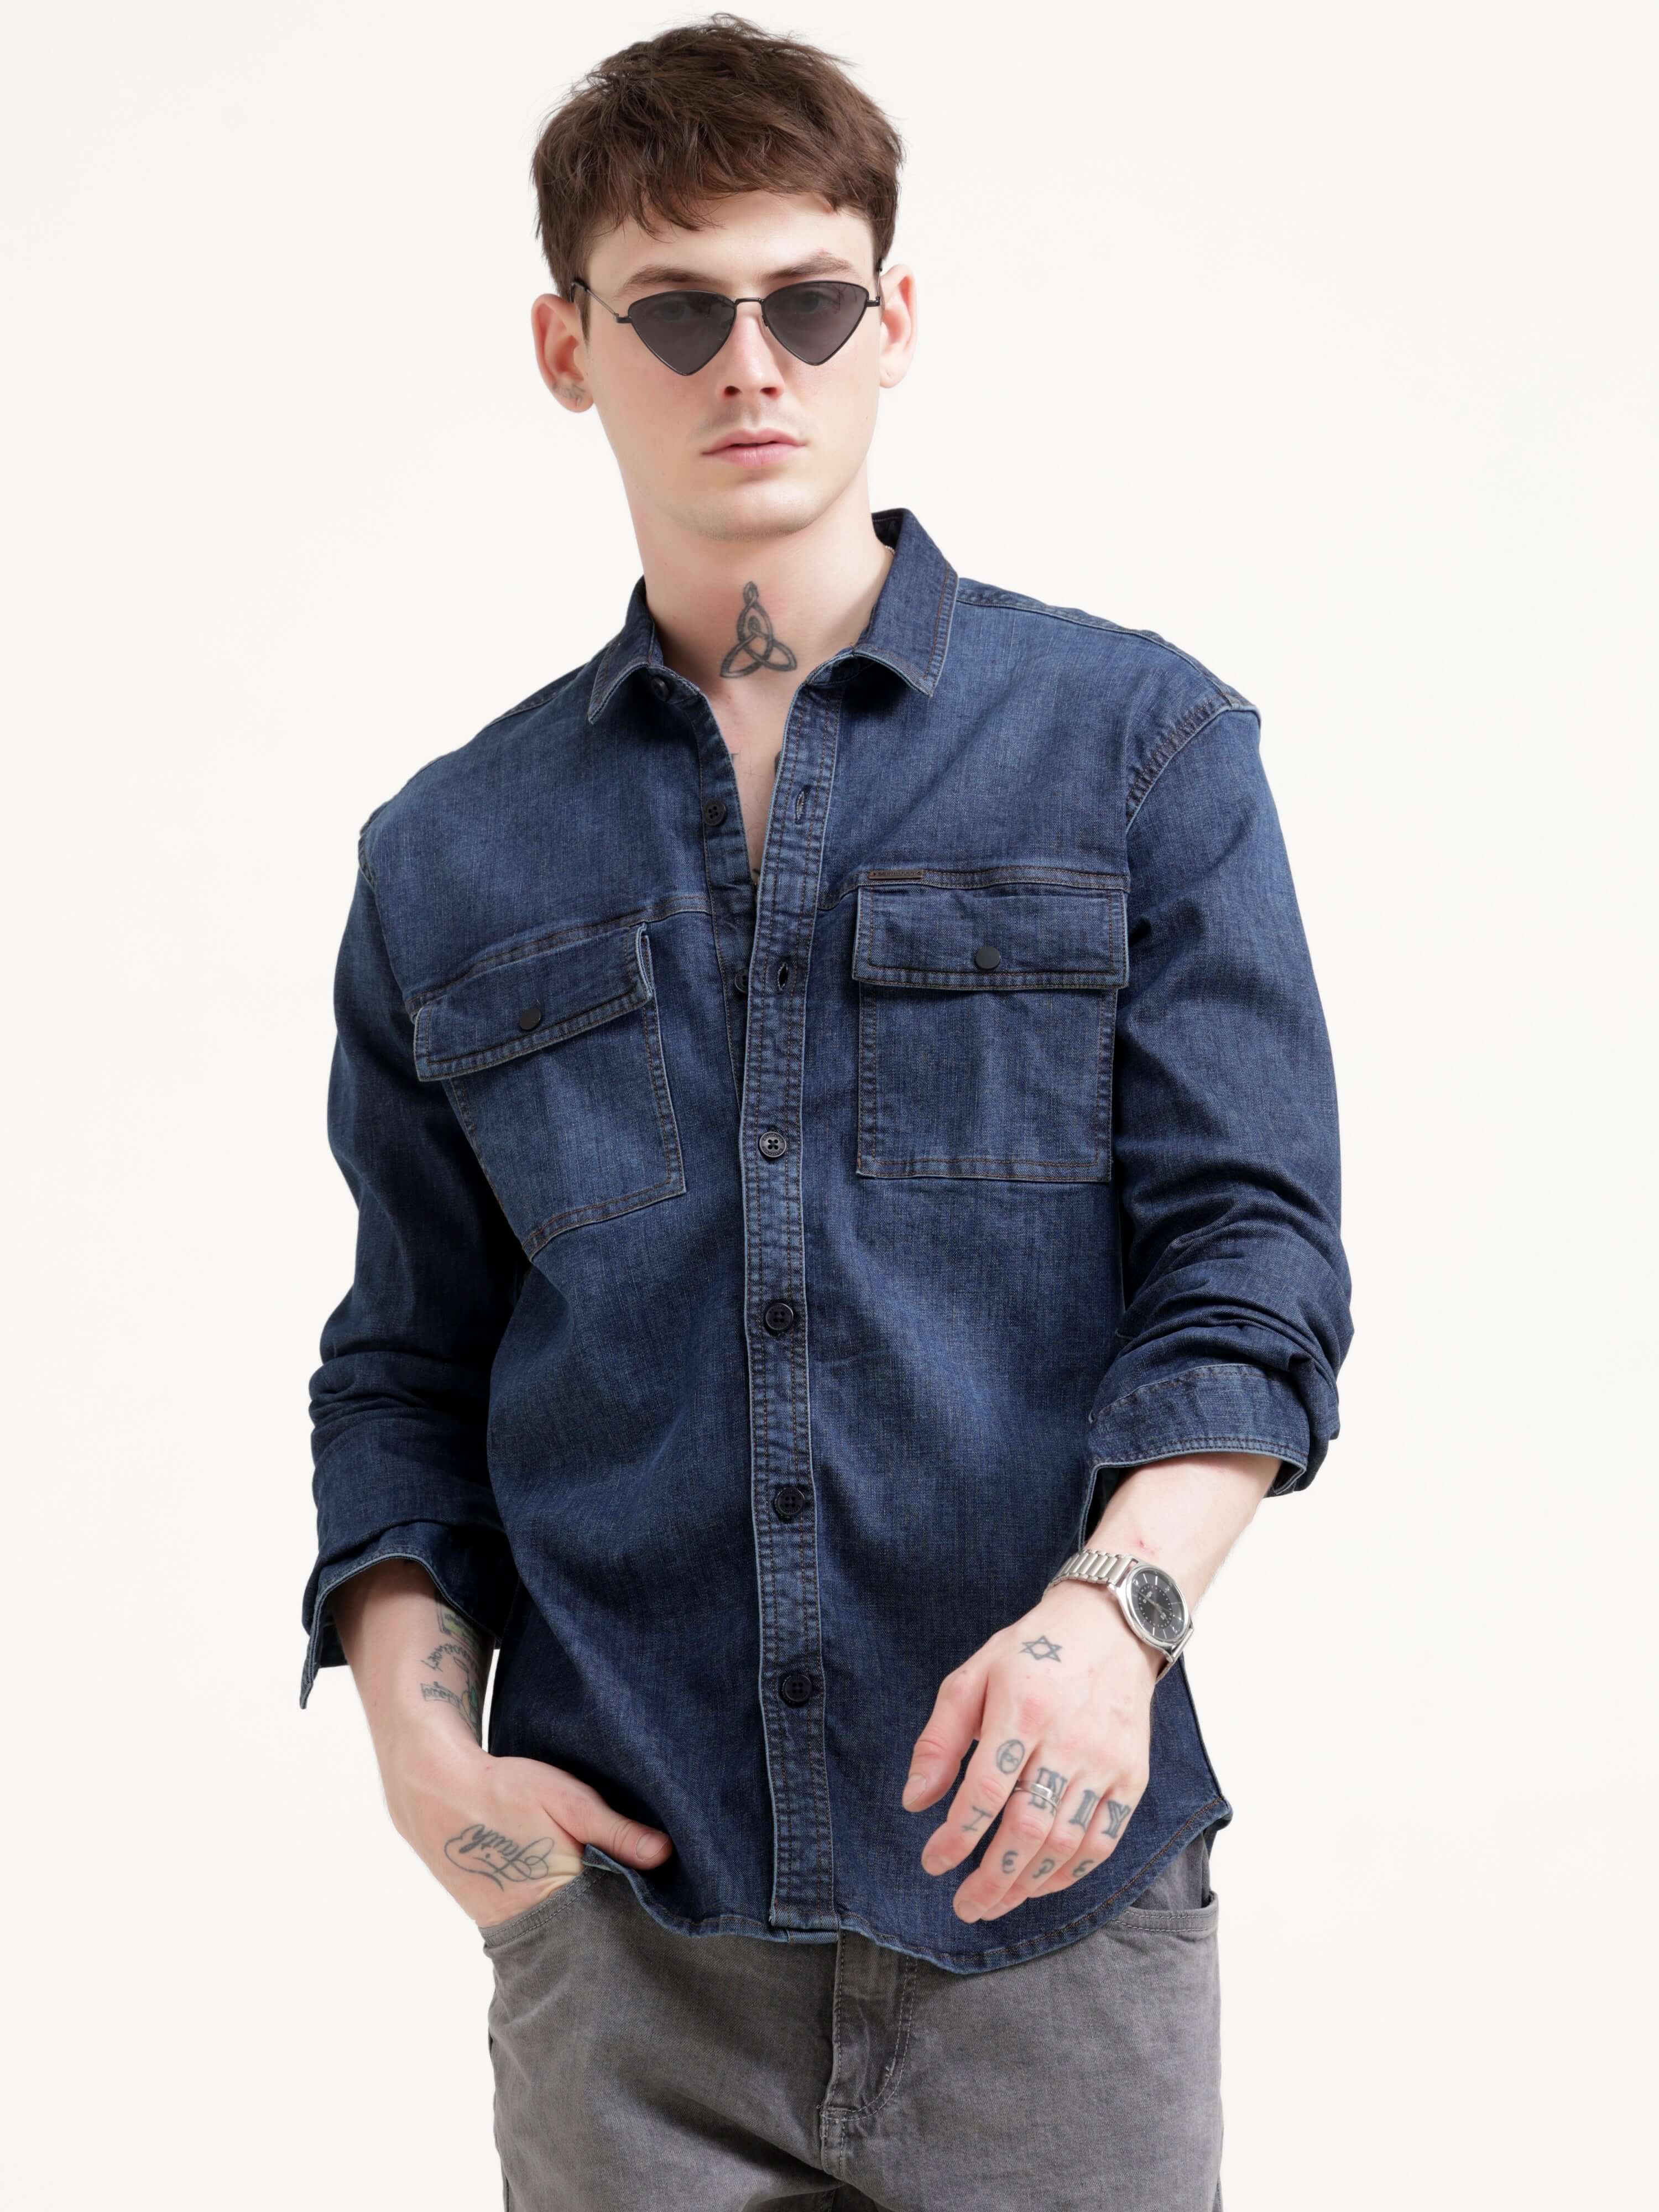 Dusky indigo blue denim shirt - Men's Casual Wear Shop Online at Estilocus. Rock the seasons with this dusky indigo blue denim shirt. Perfect tailoring for a sophisticated look, and breathable cotton to stay cool.